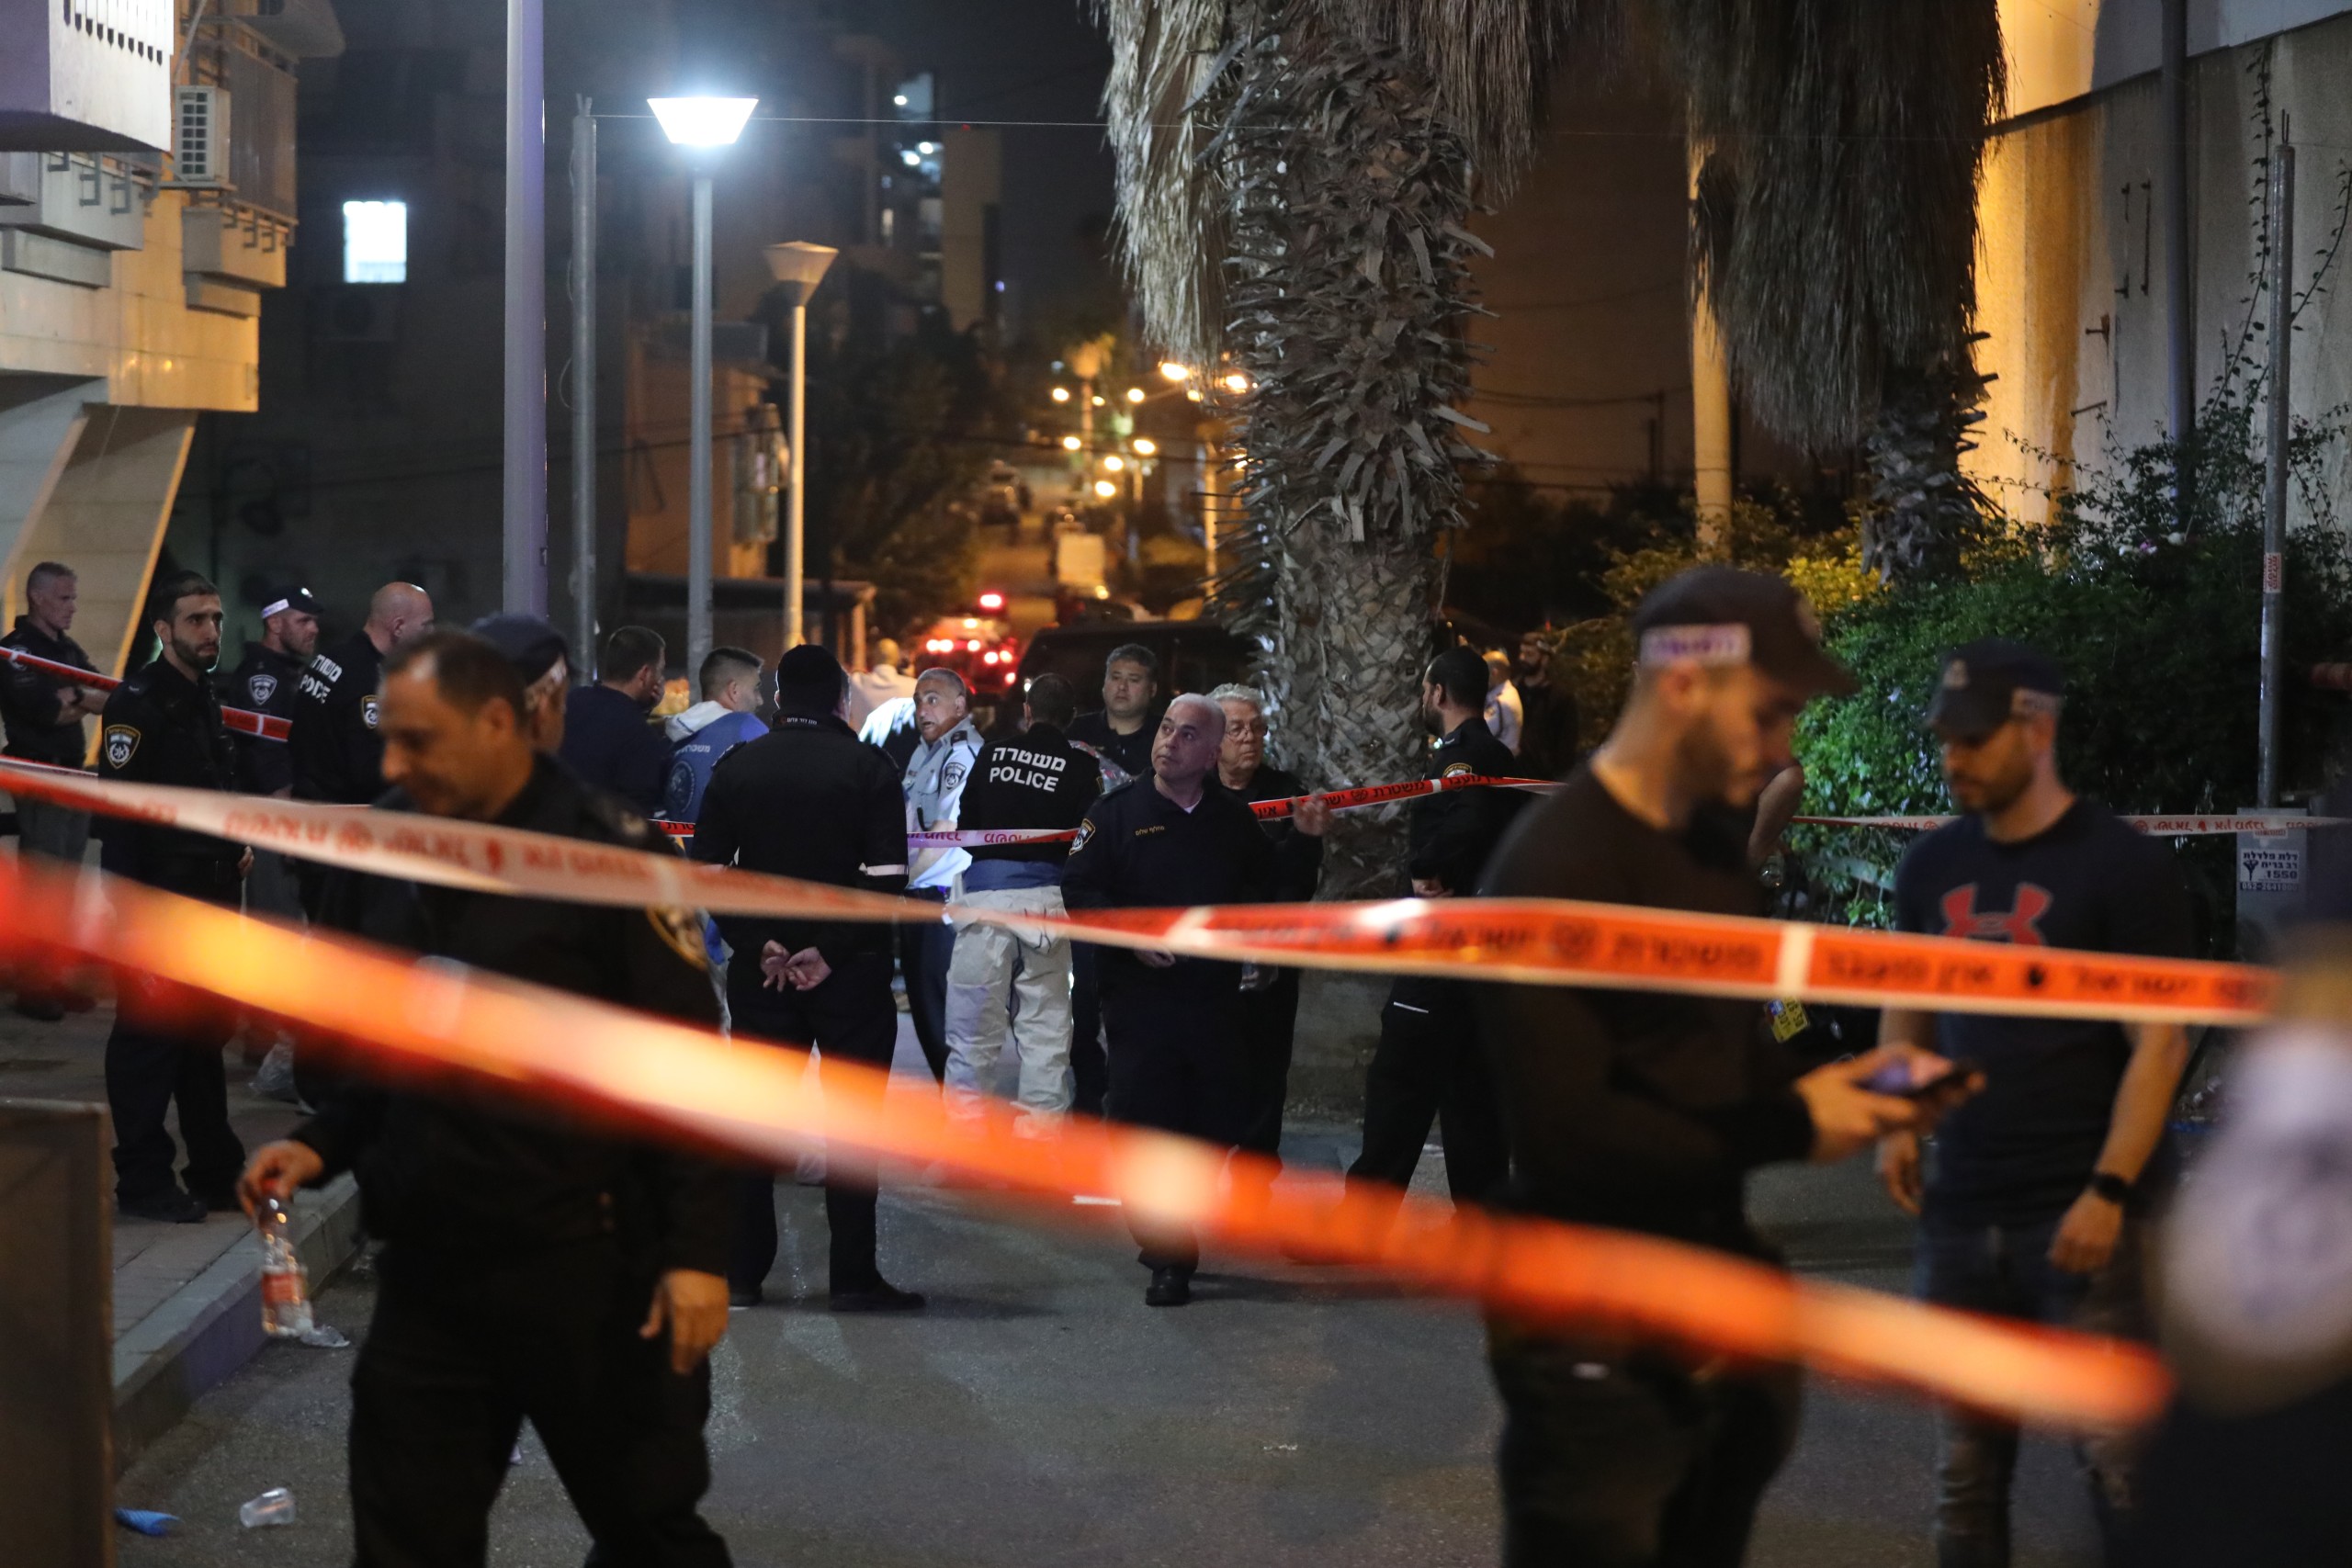 epa09858789 Israeli emergency personnel at the scene of attack in city of Bnei Brak, near Tel Aviv, Israel, 29 March 2022. According to emergency services, at least five Israelis where killed in a shooting attack by Israeli Arab gunmen.  EPA/ABIR SULTAN